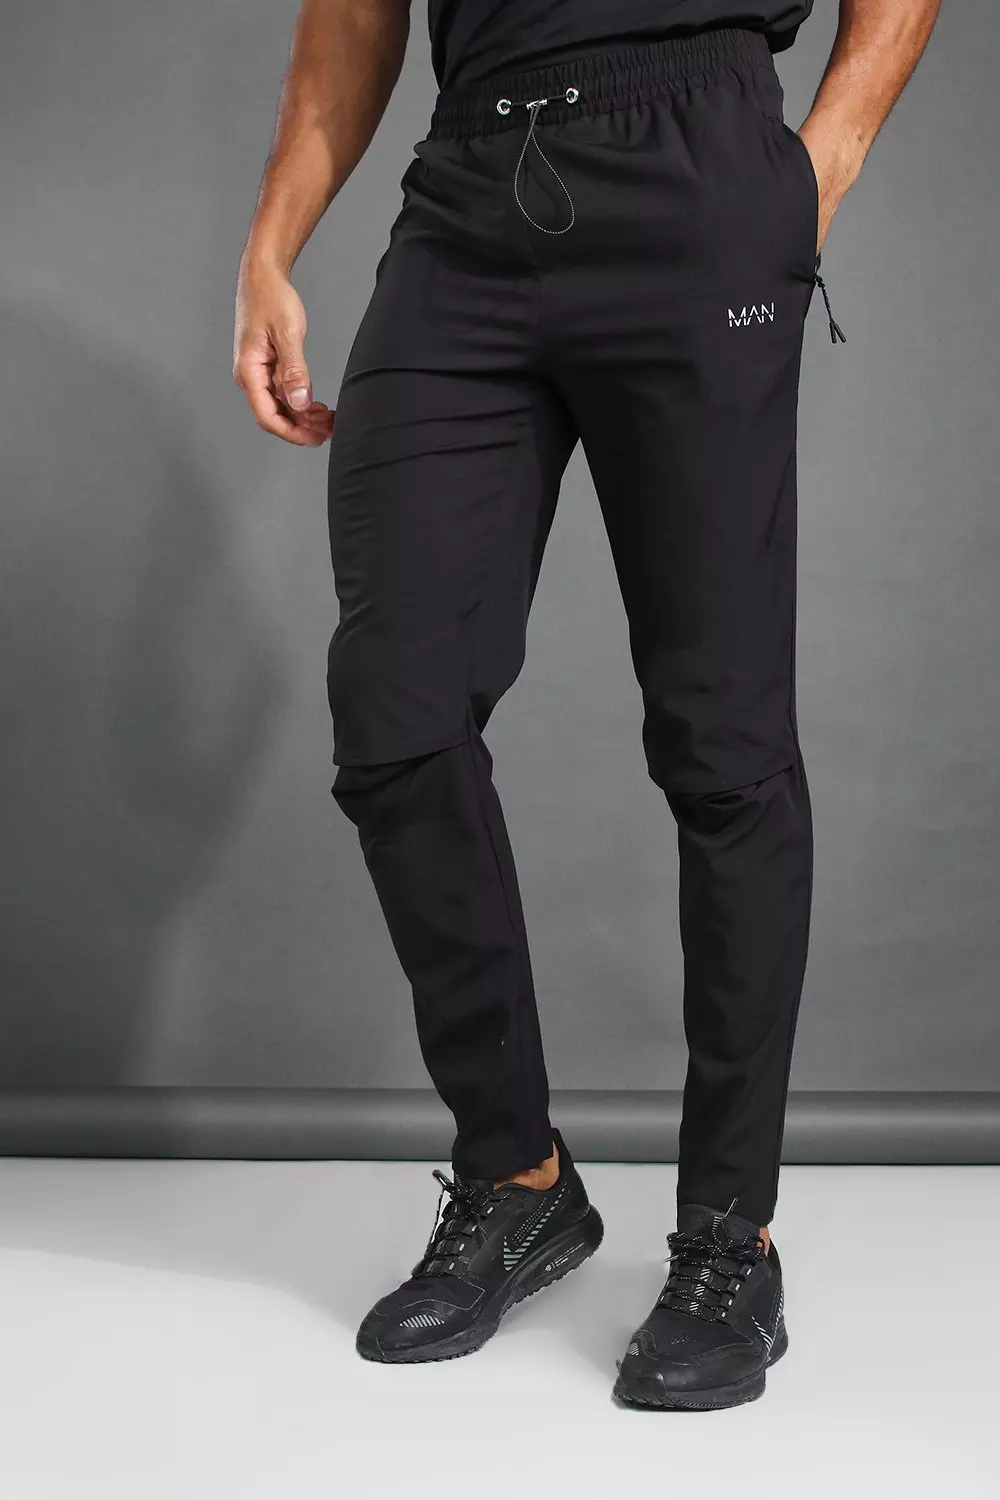 Man Active Gym Tapered Fit Sweatpants Black